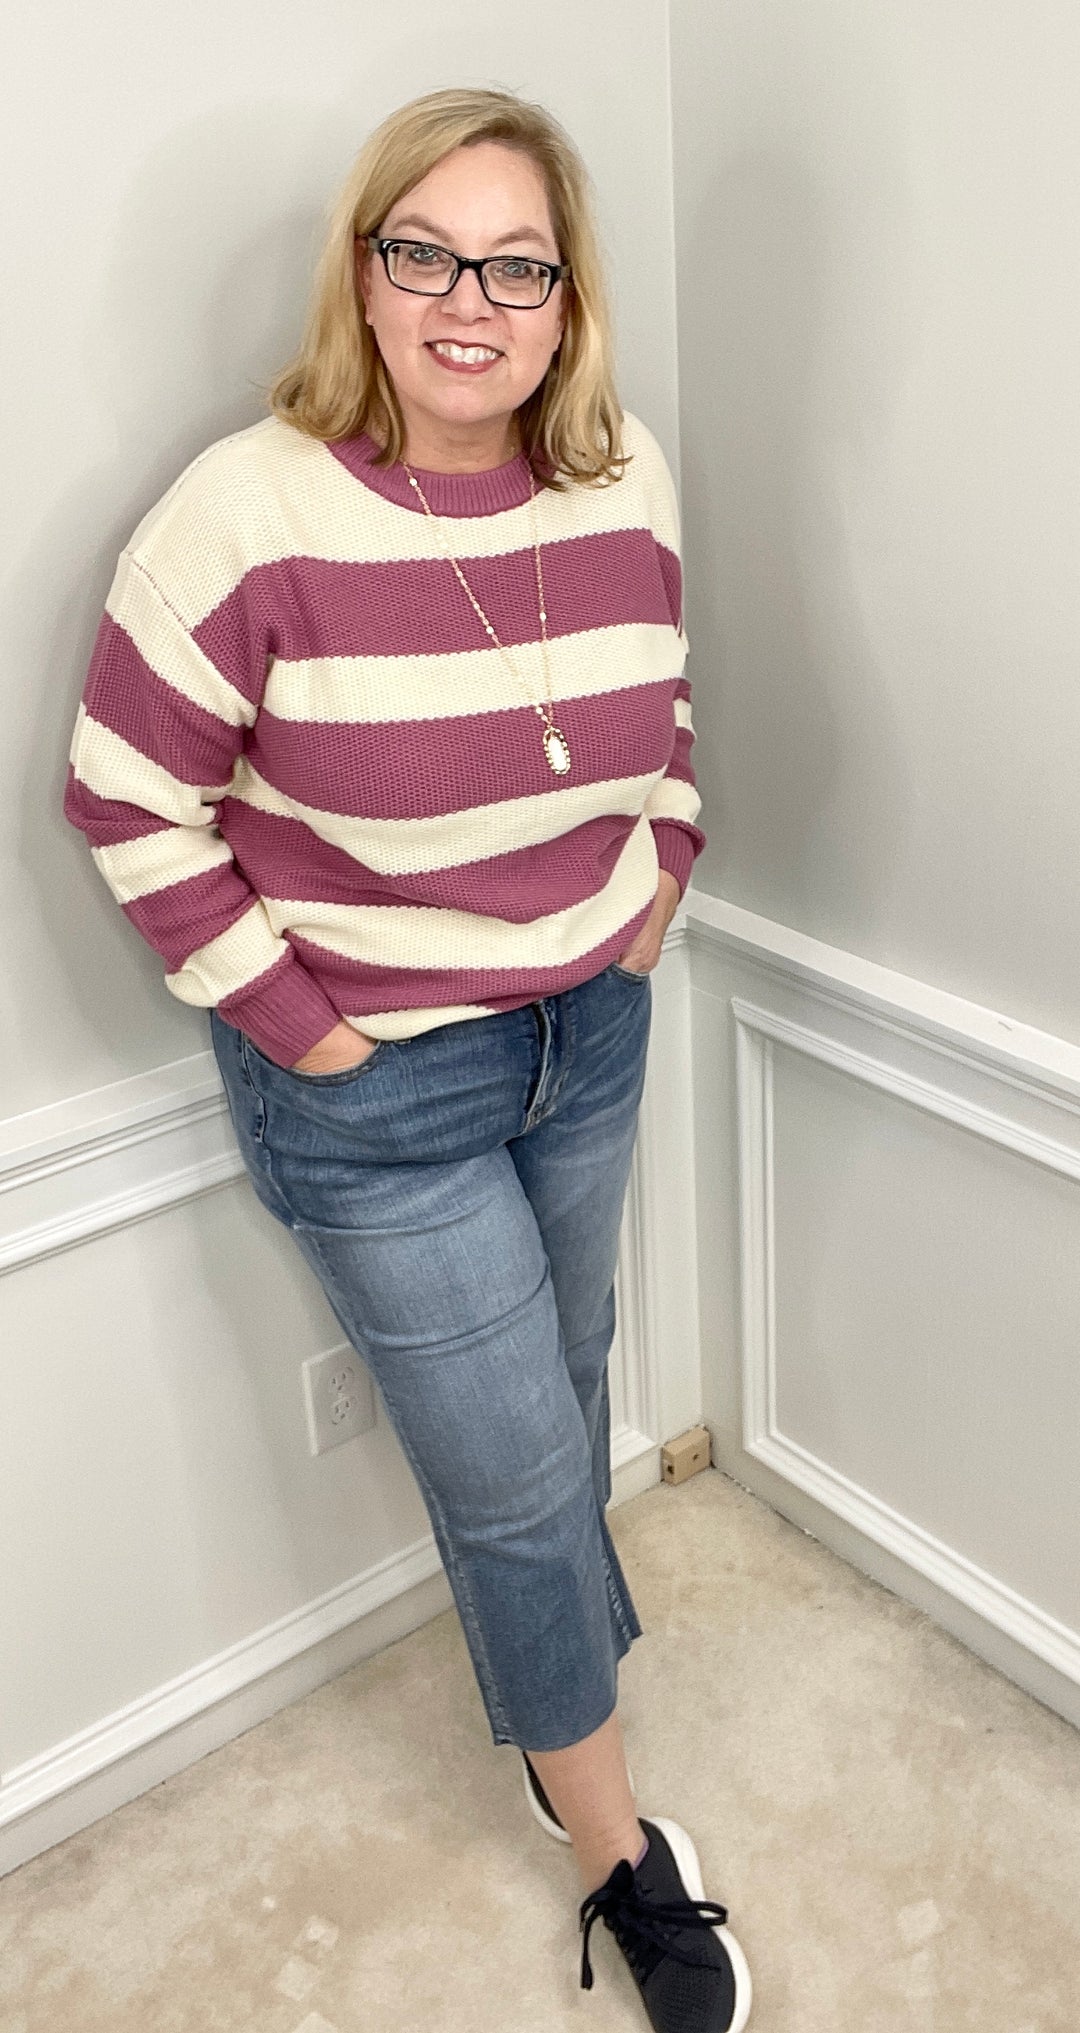 Raspberries & Cream Striped Sweater-sweater-Sew in Love-Styled by Steph-Women's Fashion Clothing Boutique, Indiana